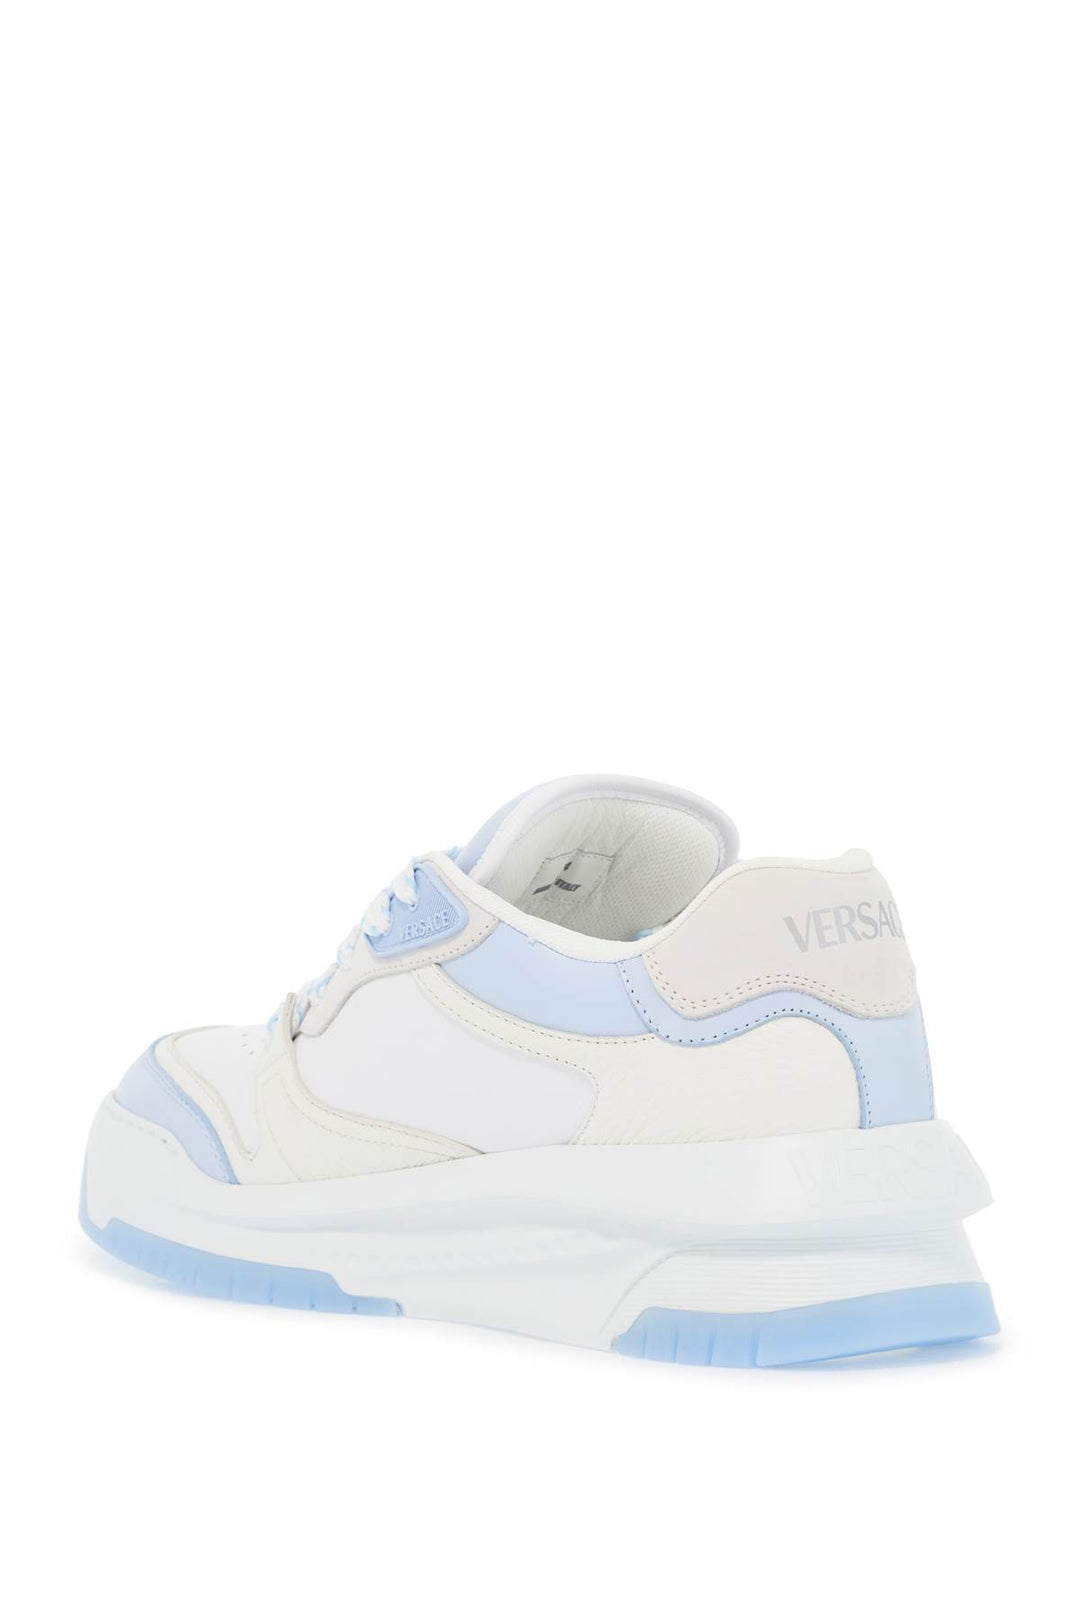 Versace Odyssey Sneakers   White